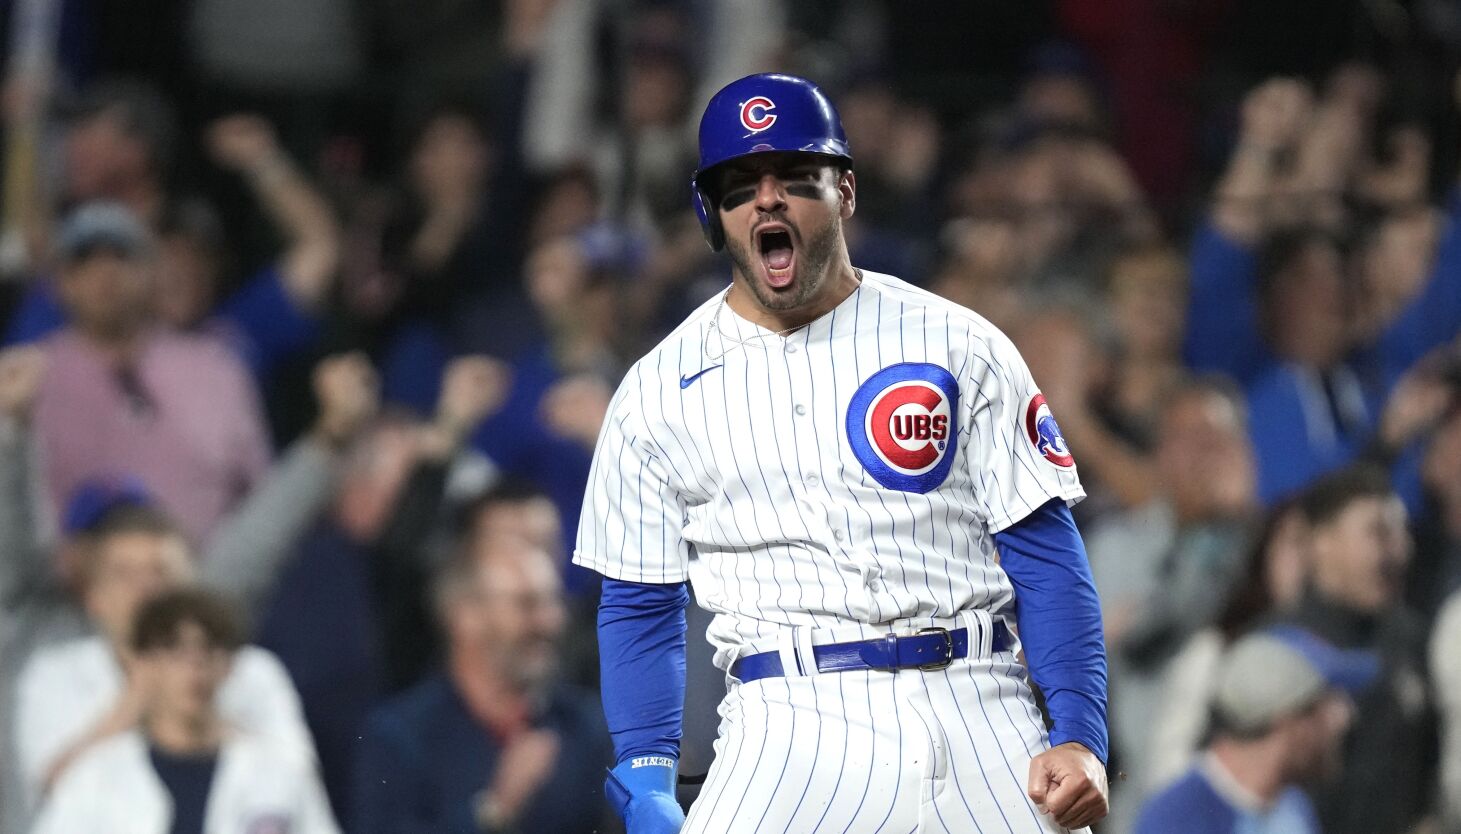 The Cubs' comeback win closed the gap behind the division-leading Pirates